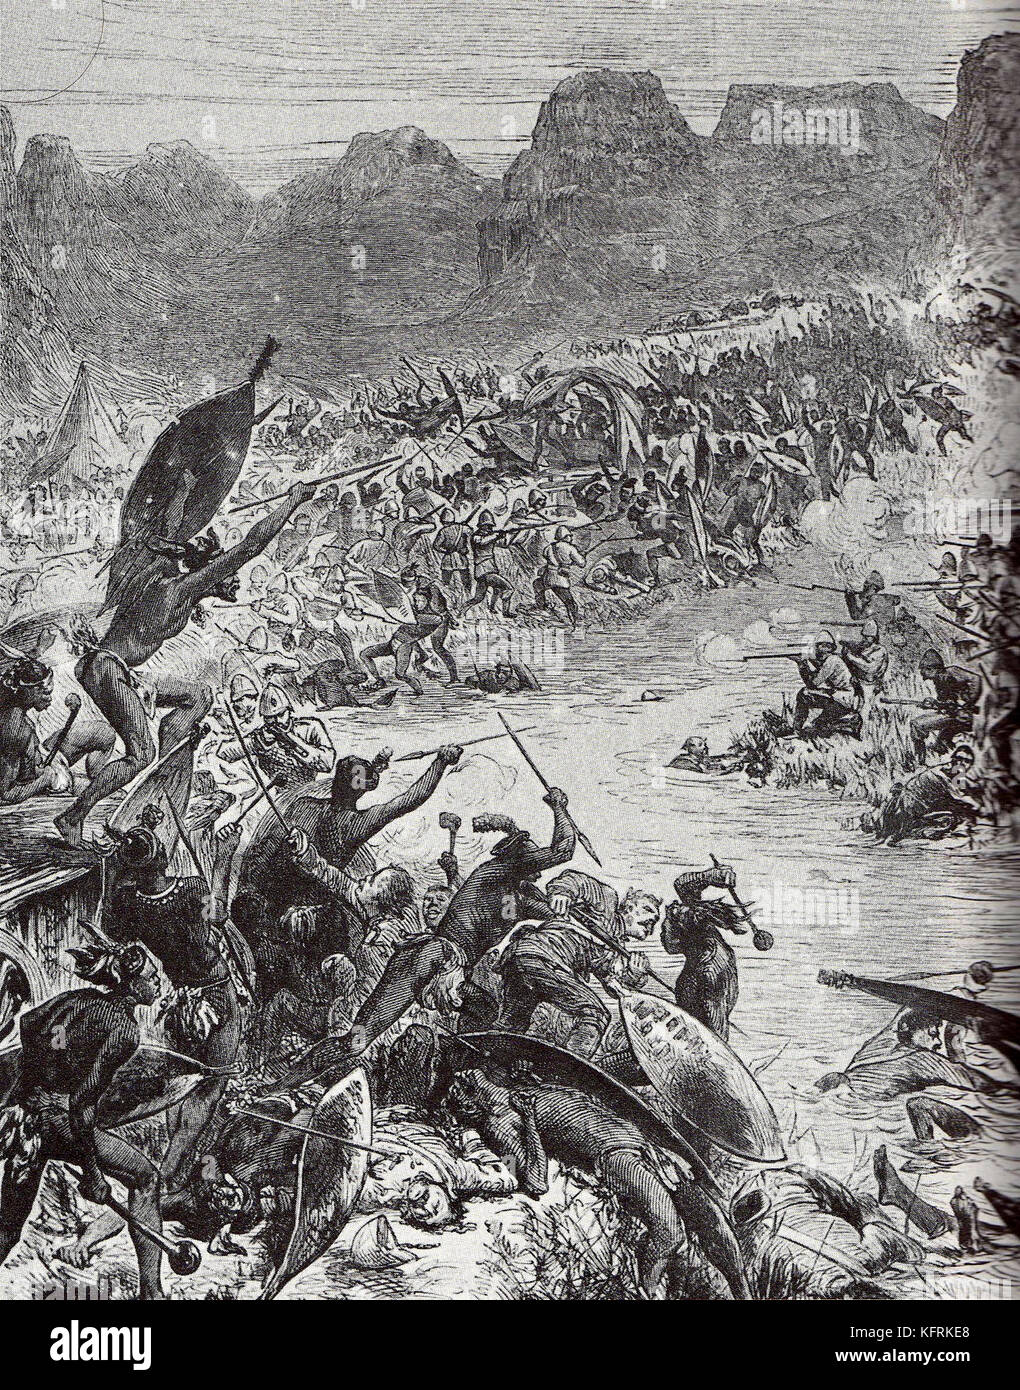 Battle of the Intombe river. The Battle of Intombe, Intombi River Drift was a small action fought on 12 March 1879, between Zulu forces and British soldiers defending a supply convoy. Stock Photo